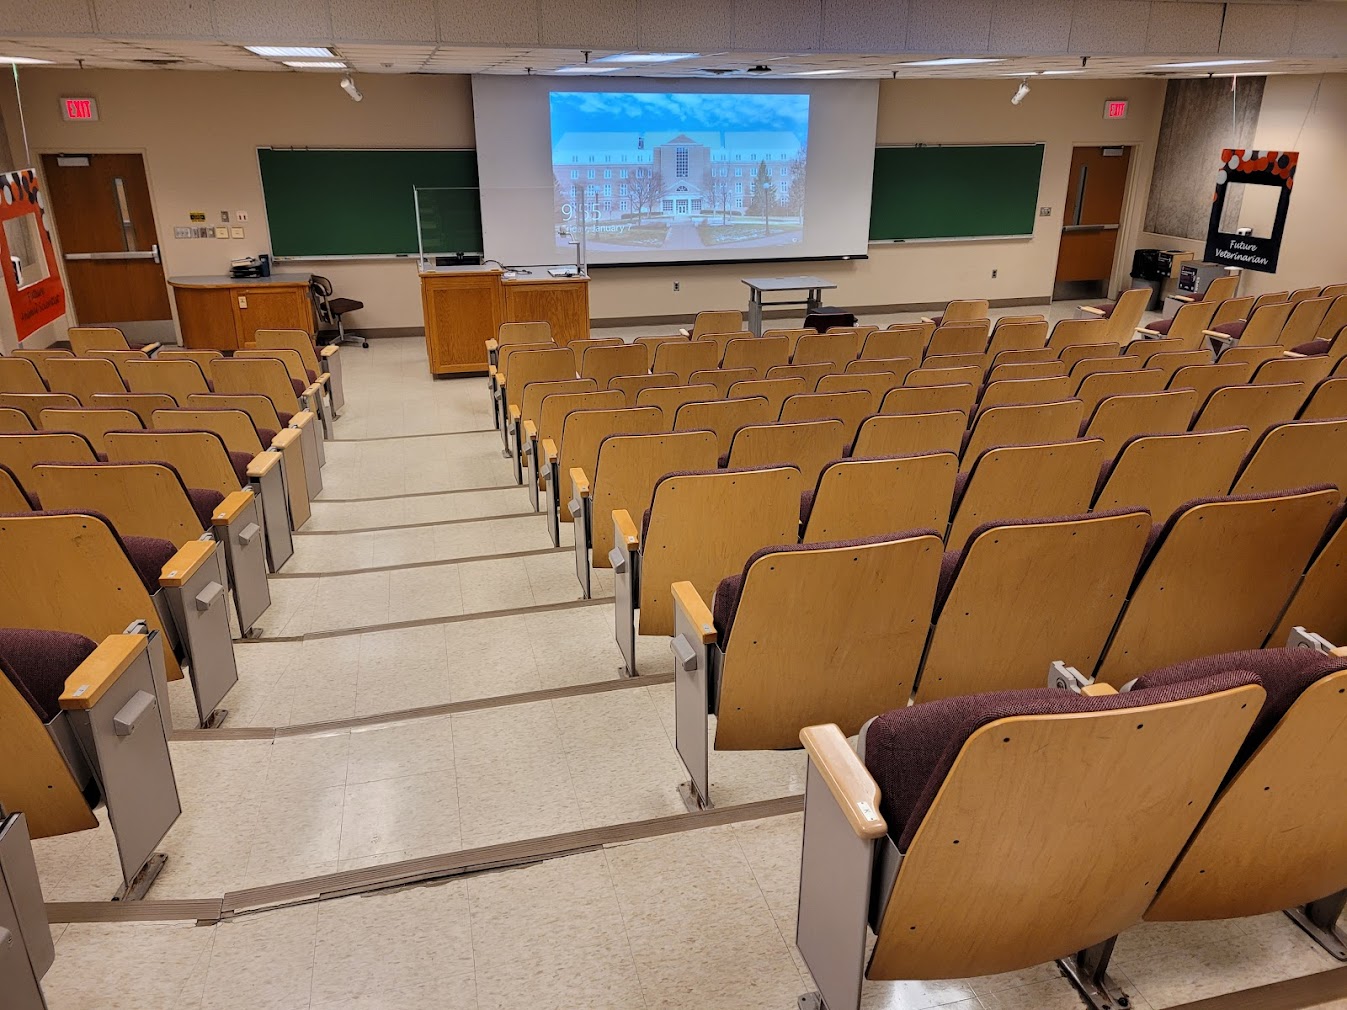 A view of the classroom with theater auditorium seating, chalkboards, lectern, and instructor table in front. 